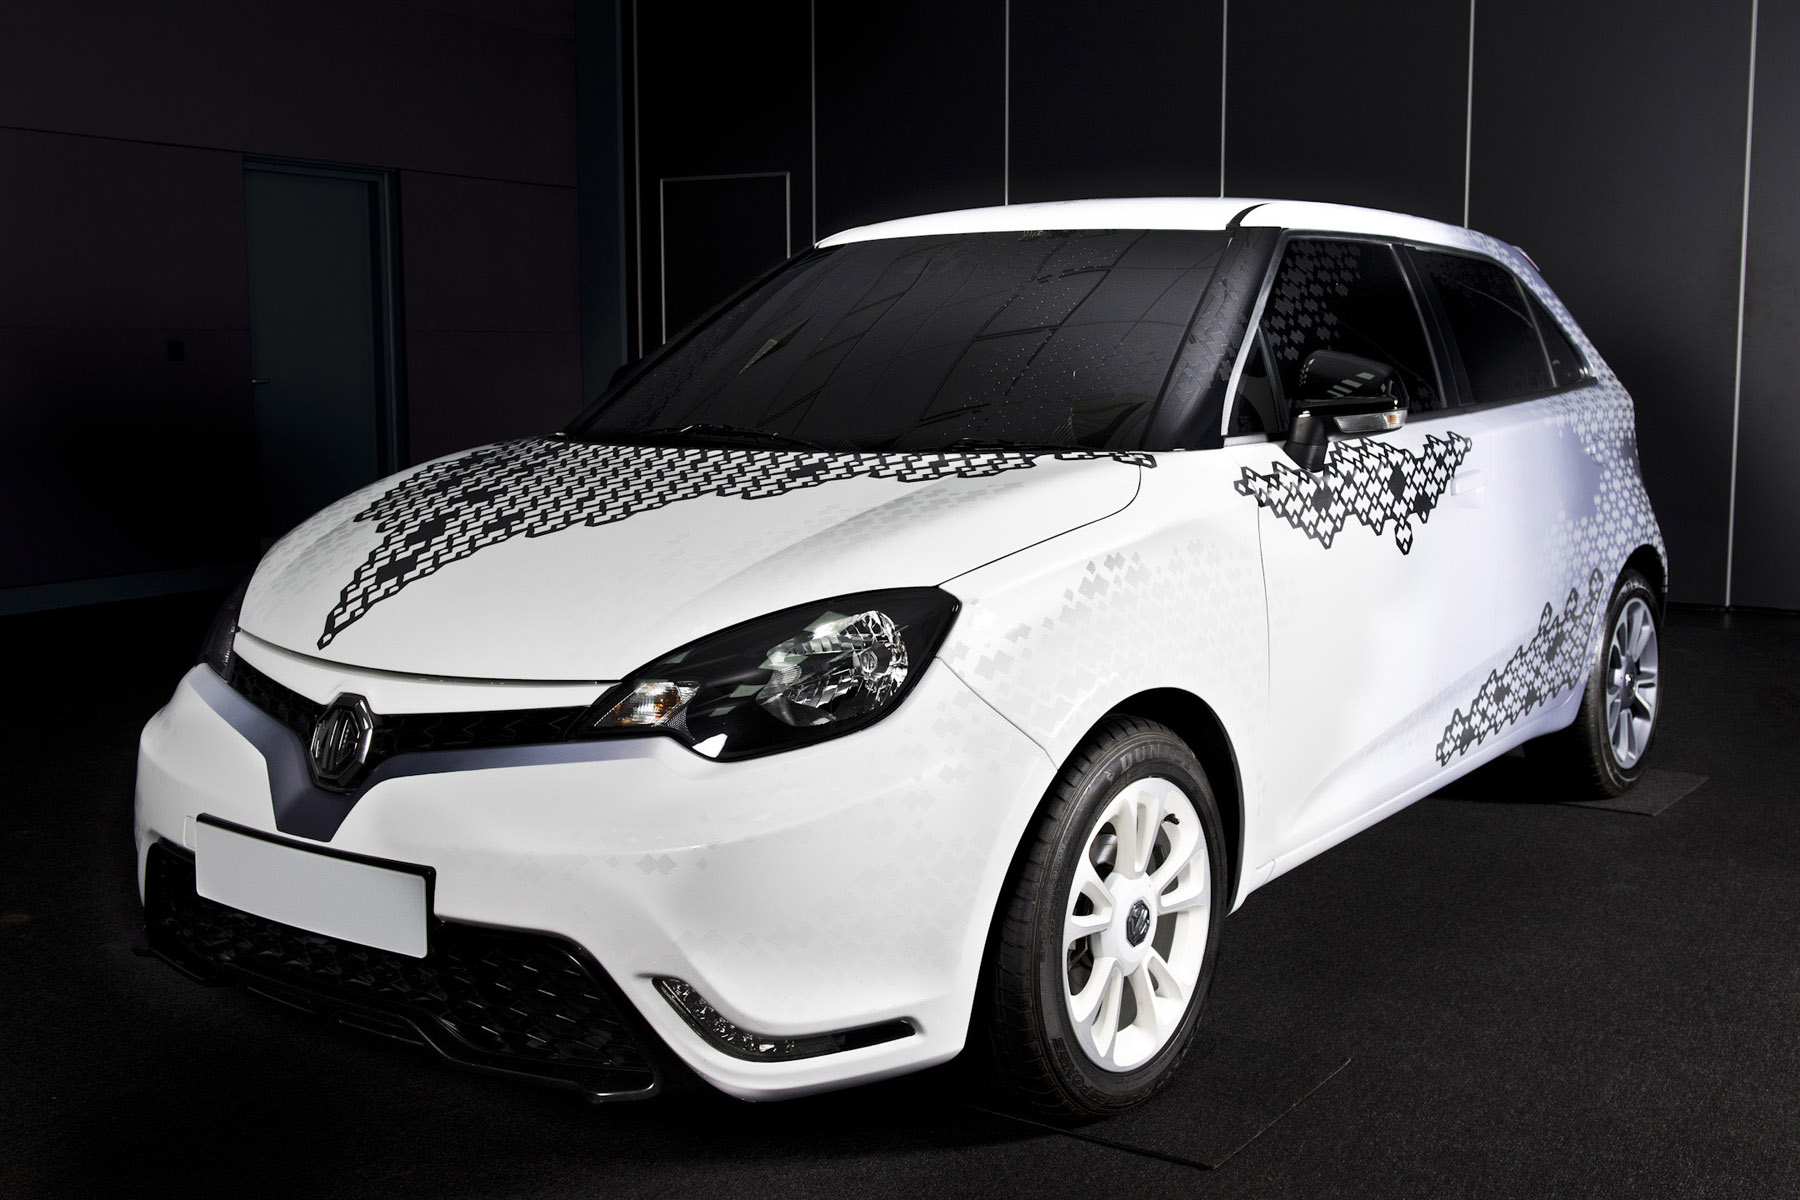 2014 MG MG3 Personalisation Design Concept